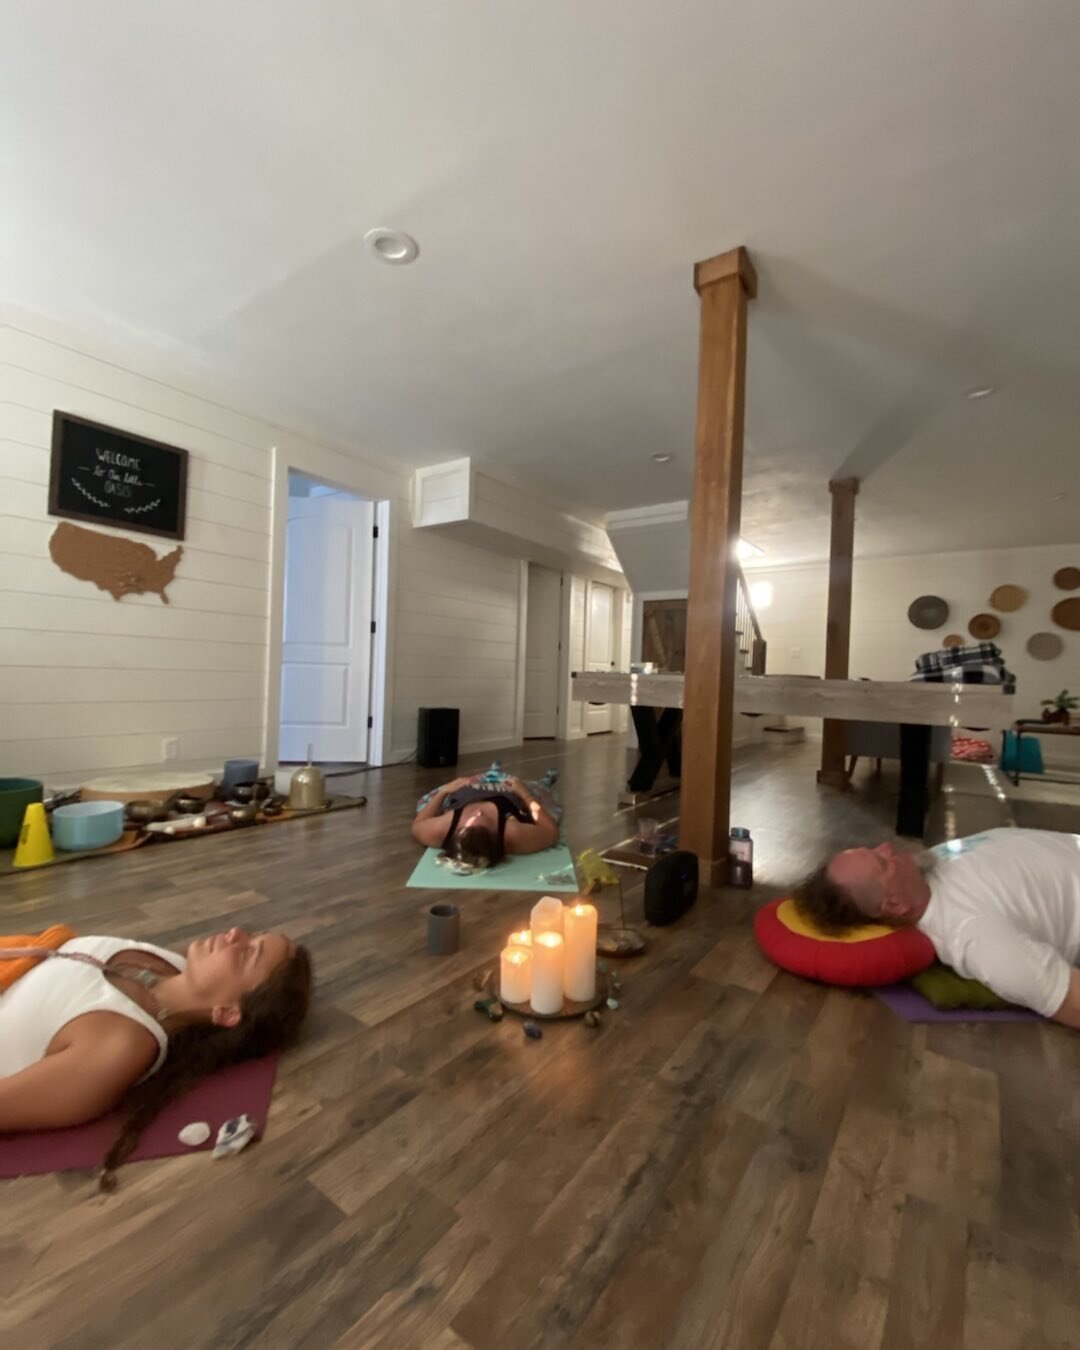 If you ever have the chance to do #breathwork with @andreafreemyer  and @me.andyv do yourself a favor and take it! A harmonious balance of masculine and feminine in these master facilitators will take you powerful places of your own. And the music pl